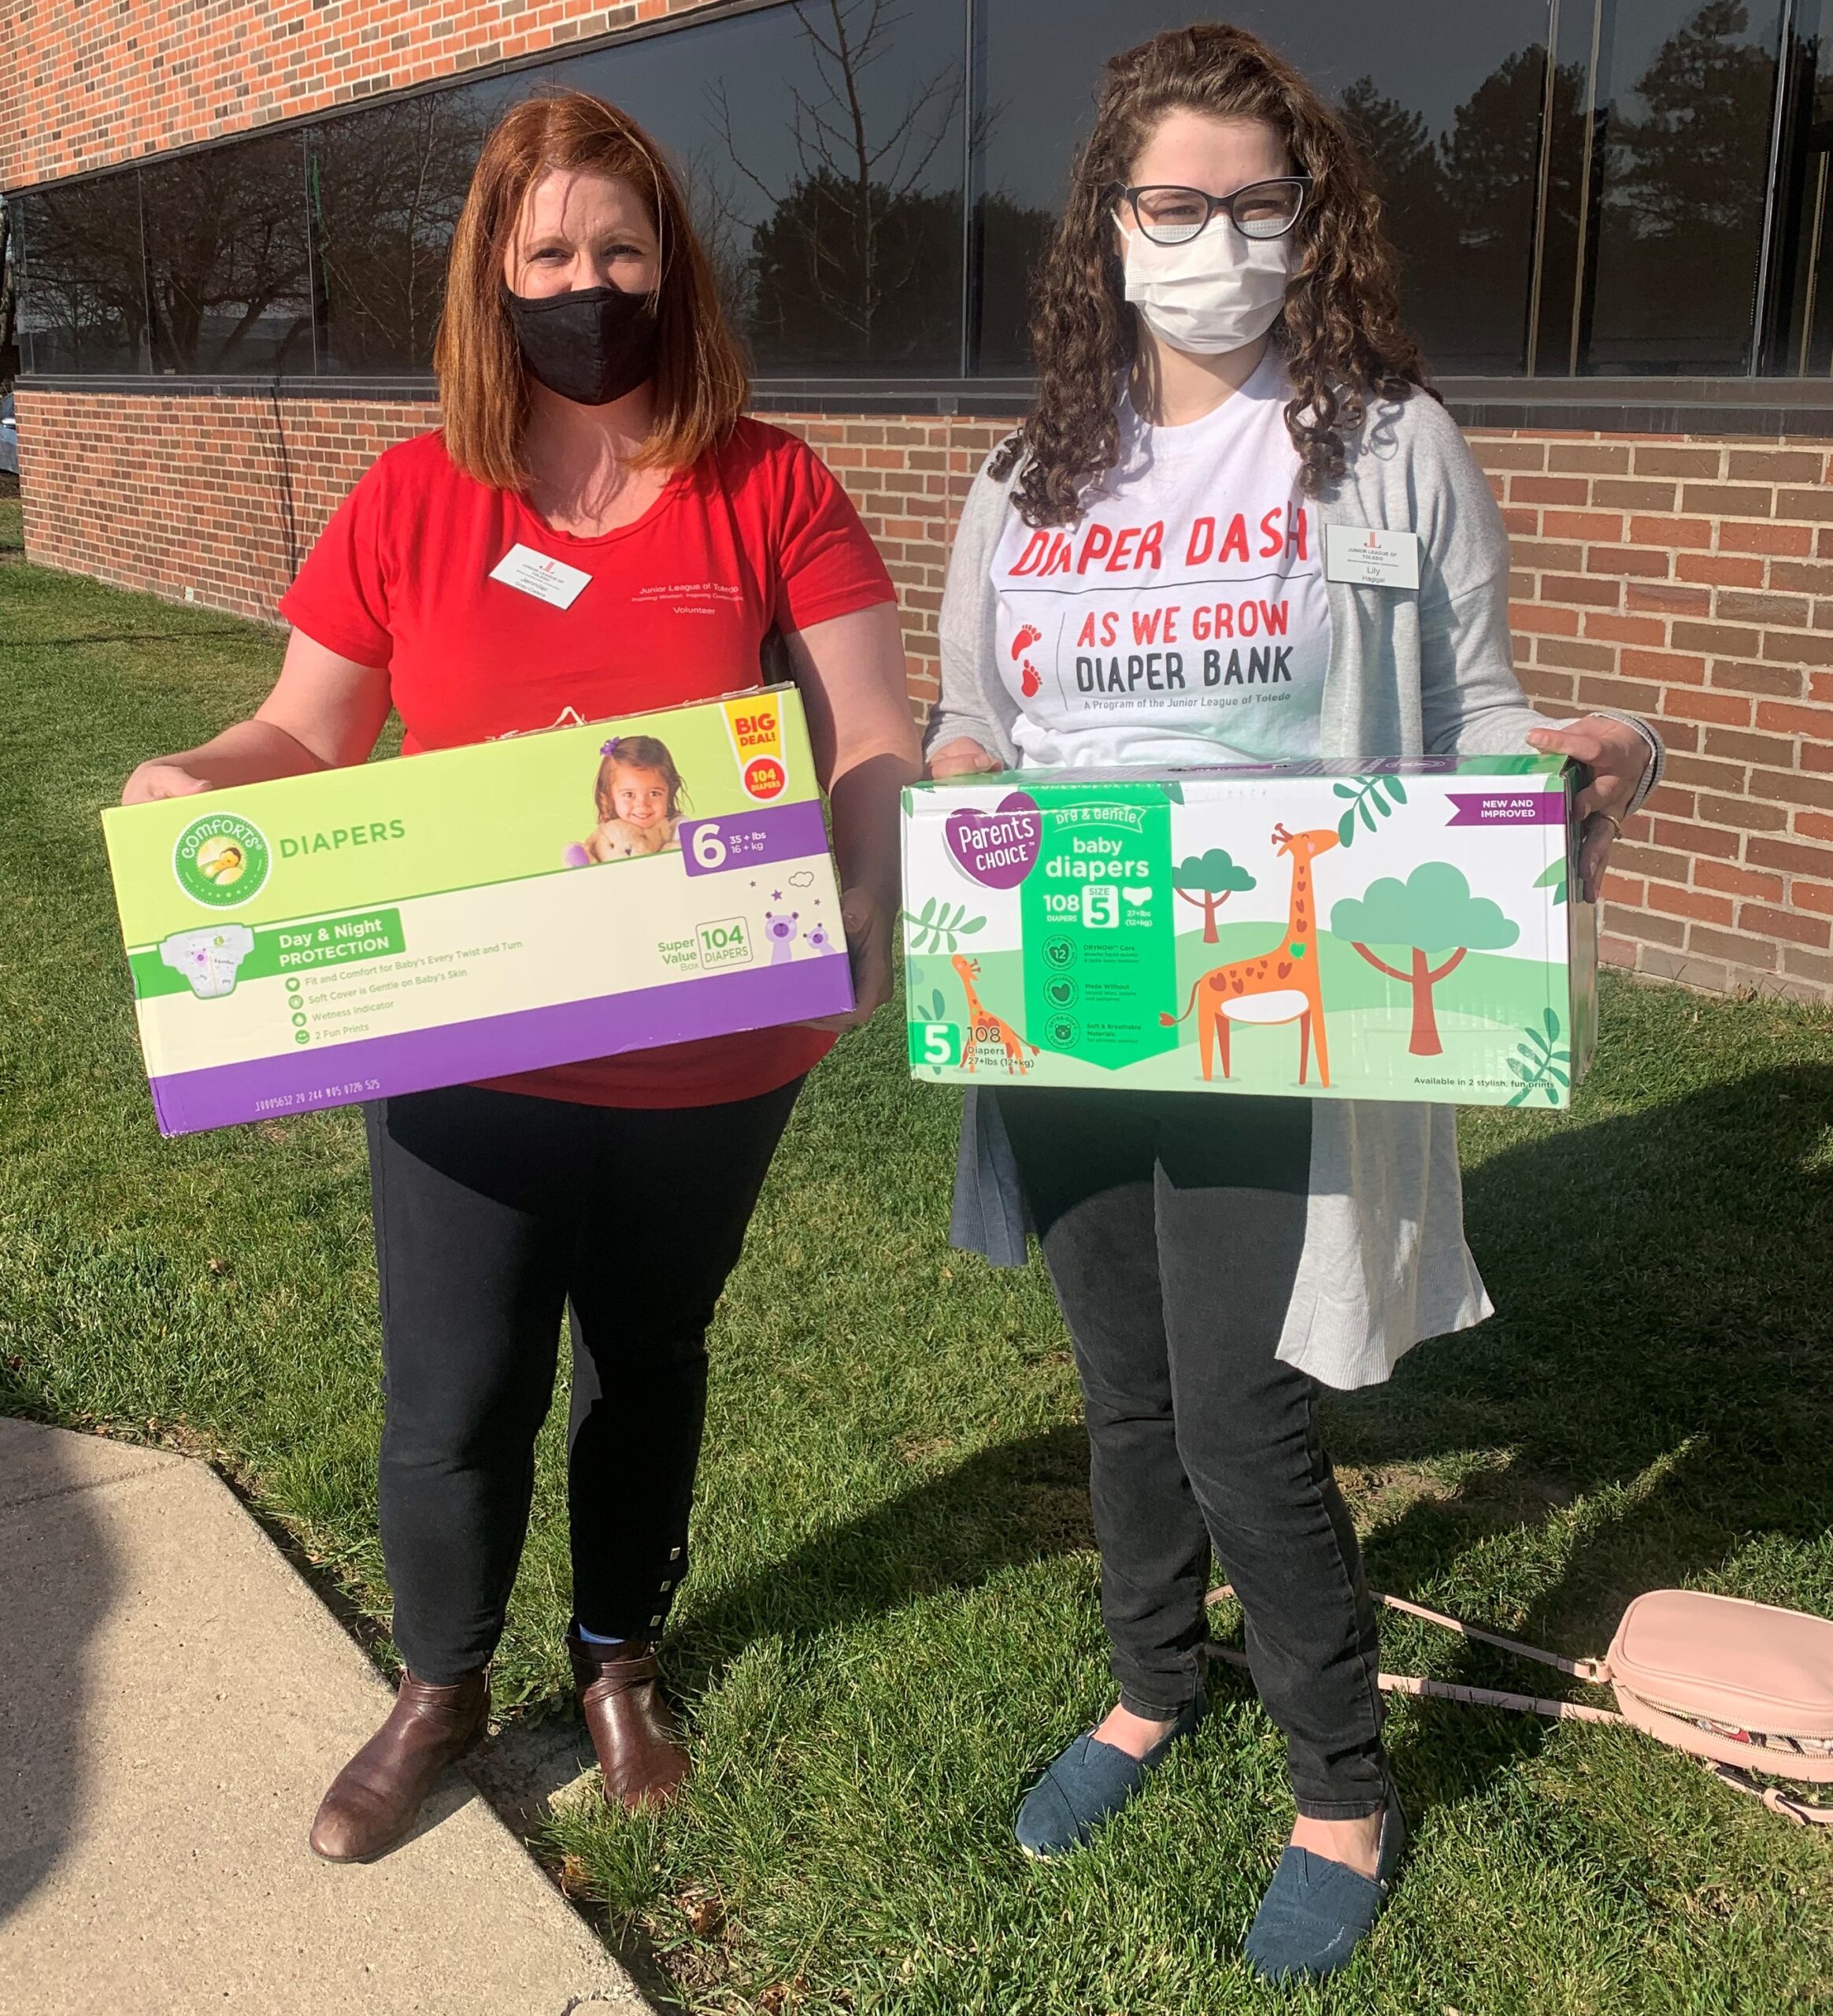 Jennifer Gray Catera and Lilly Hagigat Vrzal holding diaper boxes